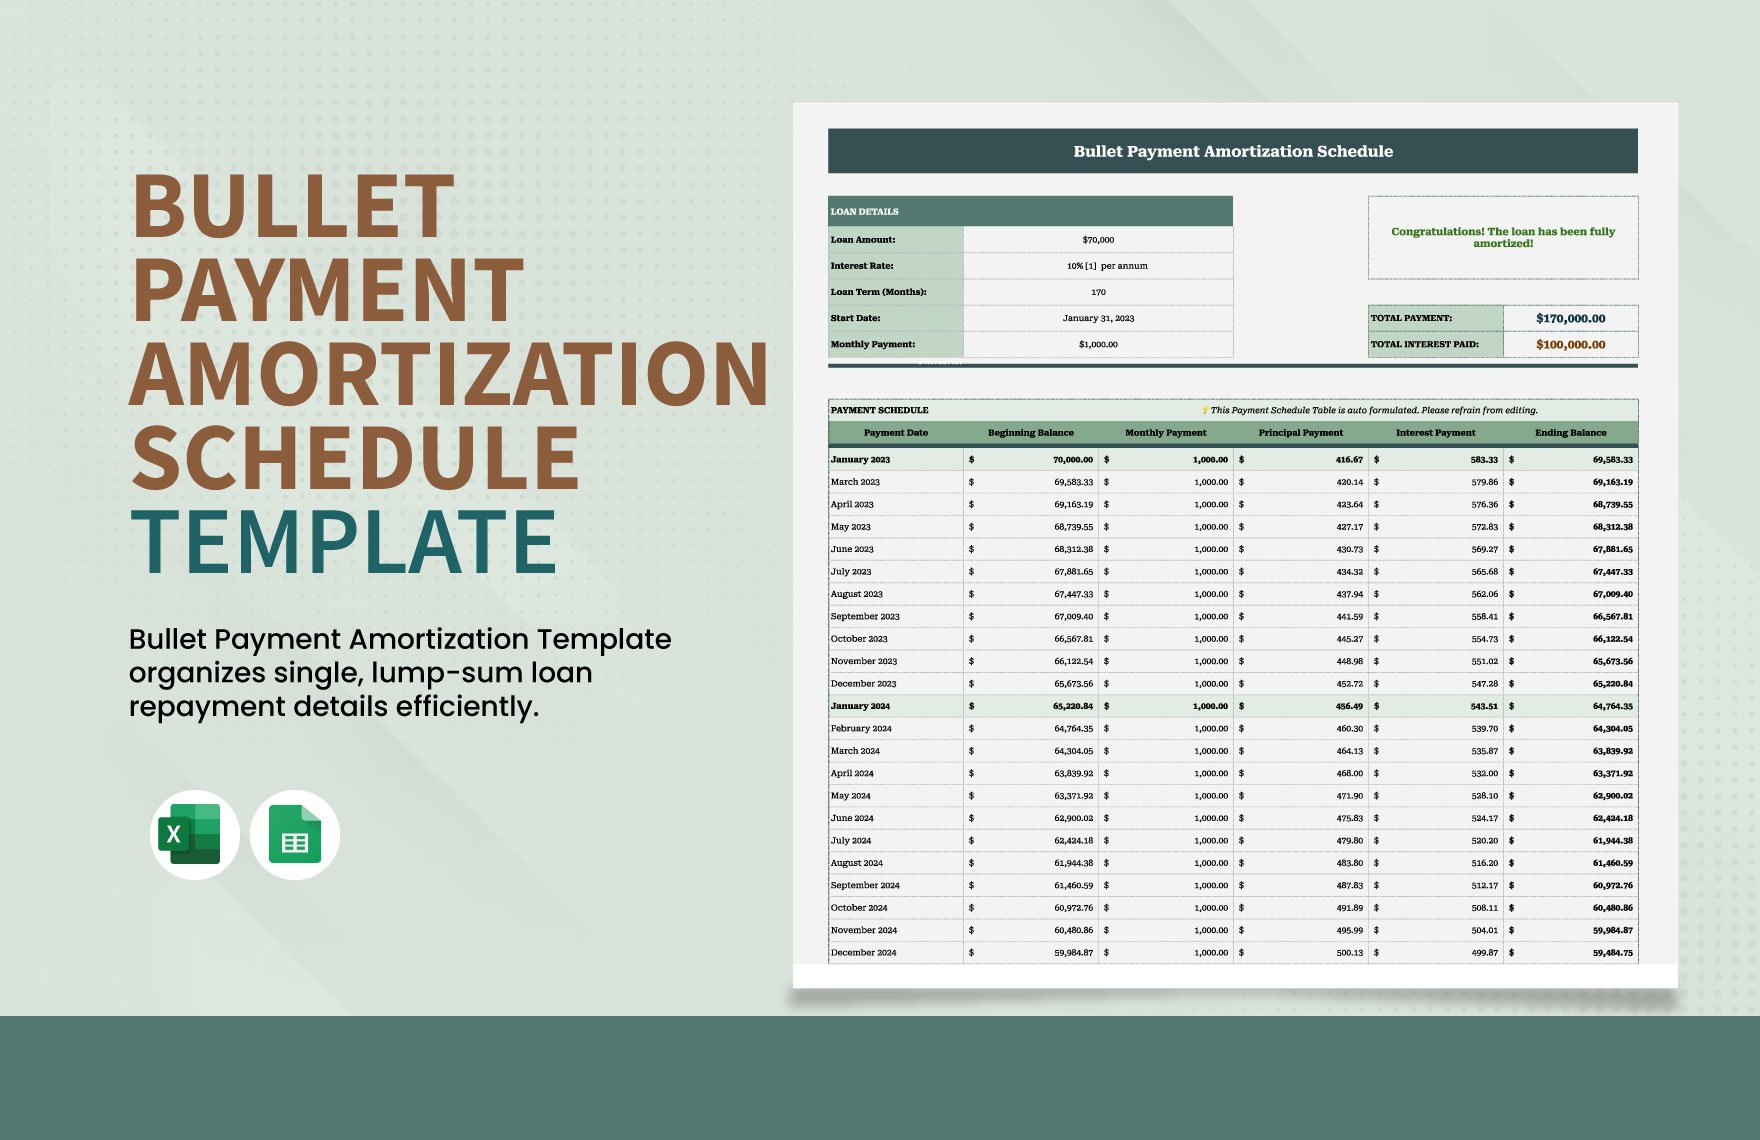 Bullet Payment Amortization Schedule Template